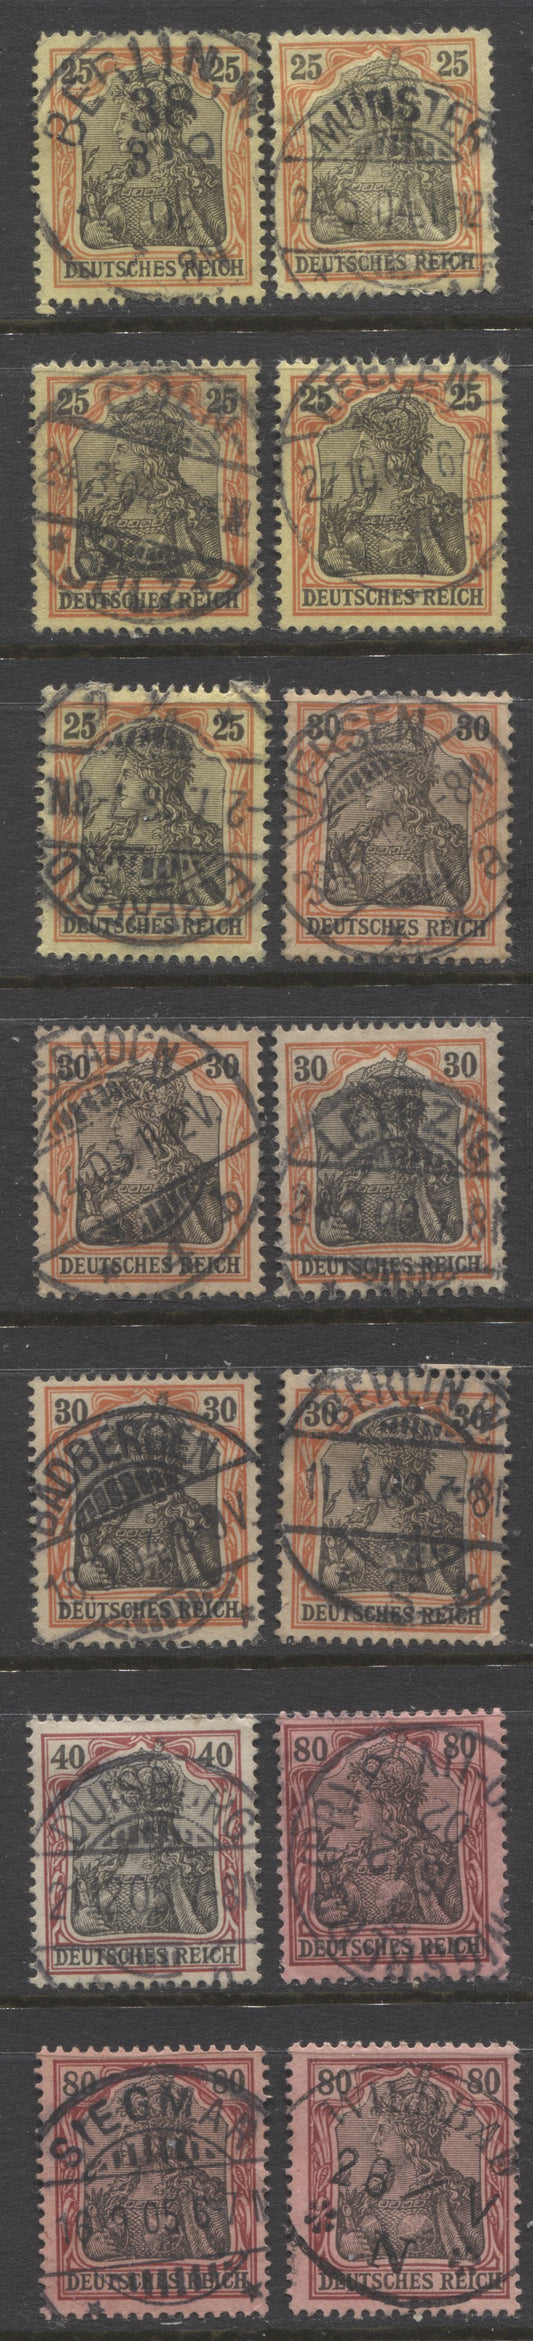 Lot 434 Germany SC#70/74 1902 Unwatermarked Germania Issue, All With SON Town Cancels, Different Shades, 14 Fine & VF Used Singles, Click on Listing to See ALL Pictures, 2022 Scott Classic Cat. $23.5